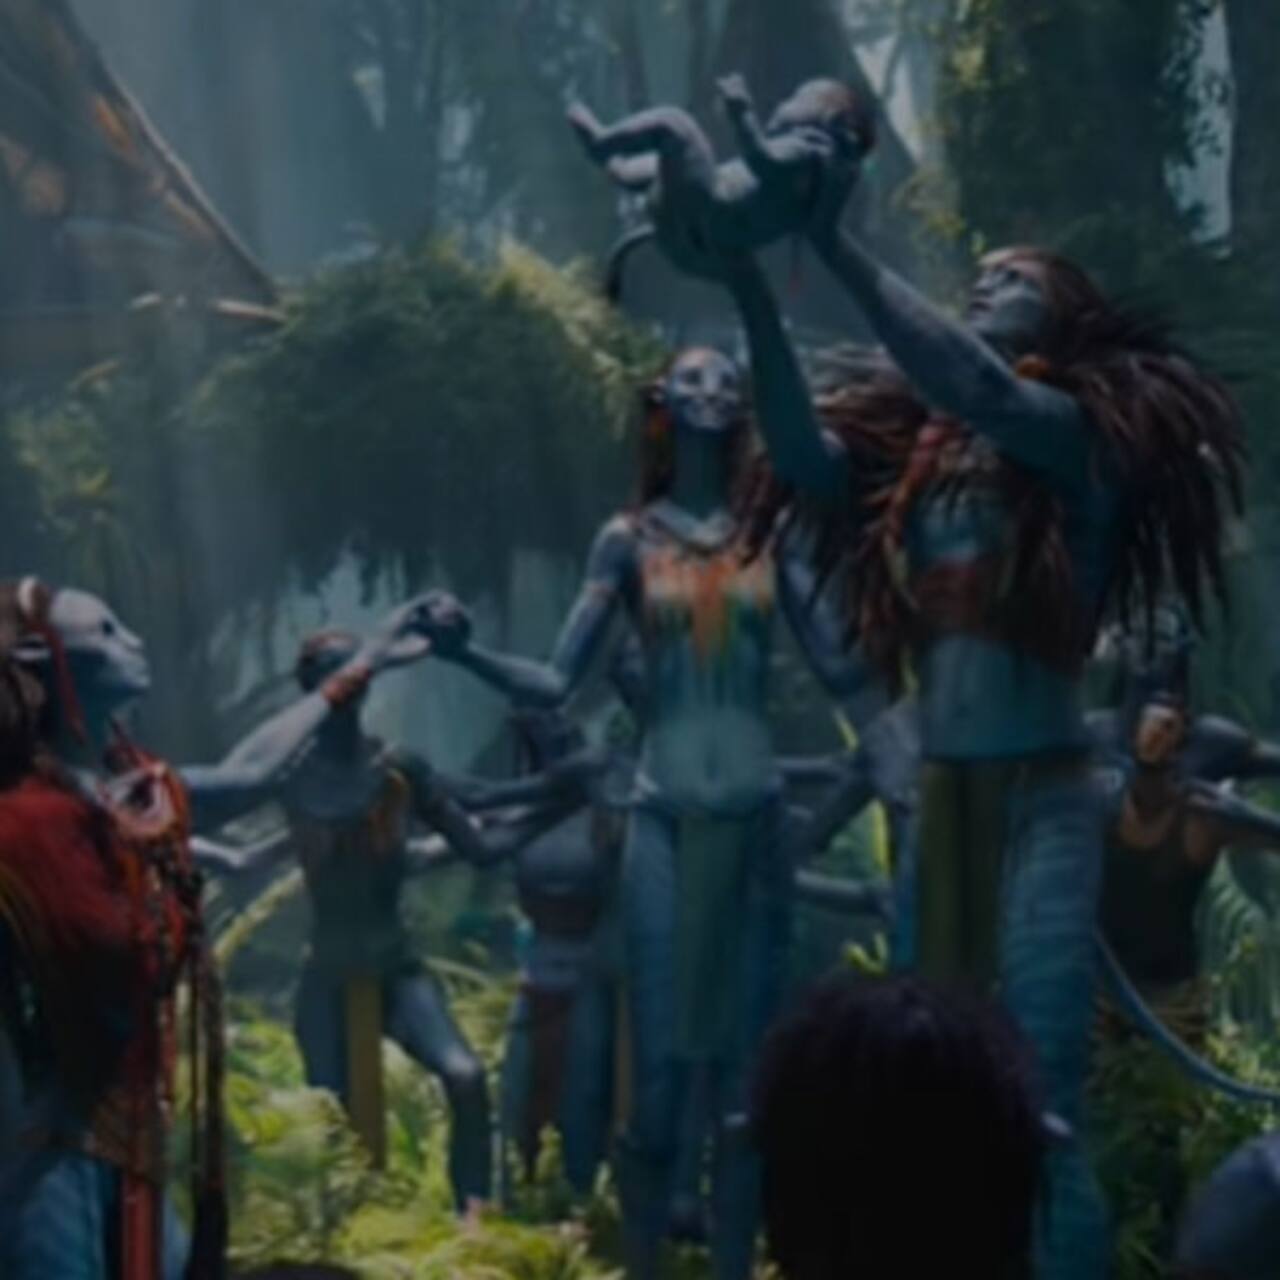 Avatar 2 The Way Of Water: Why did it take so long